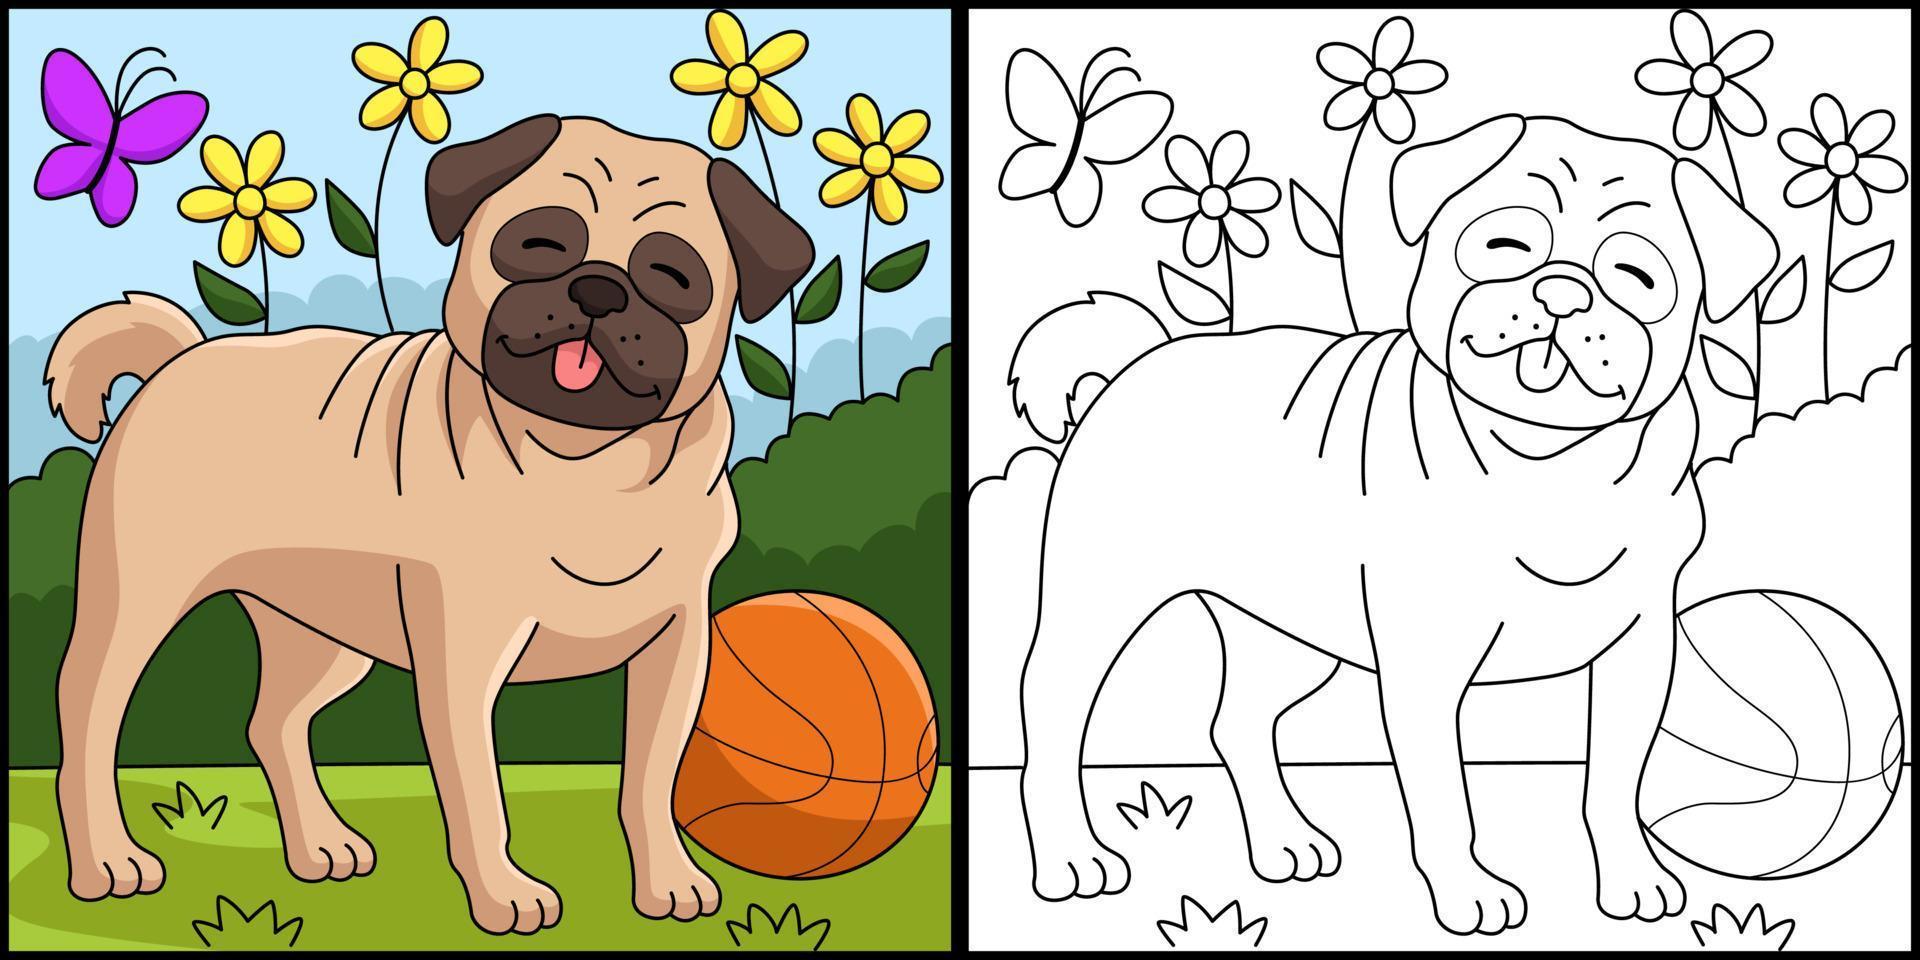 Pug Dog Coloring Page Colored Illustration vector